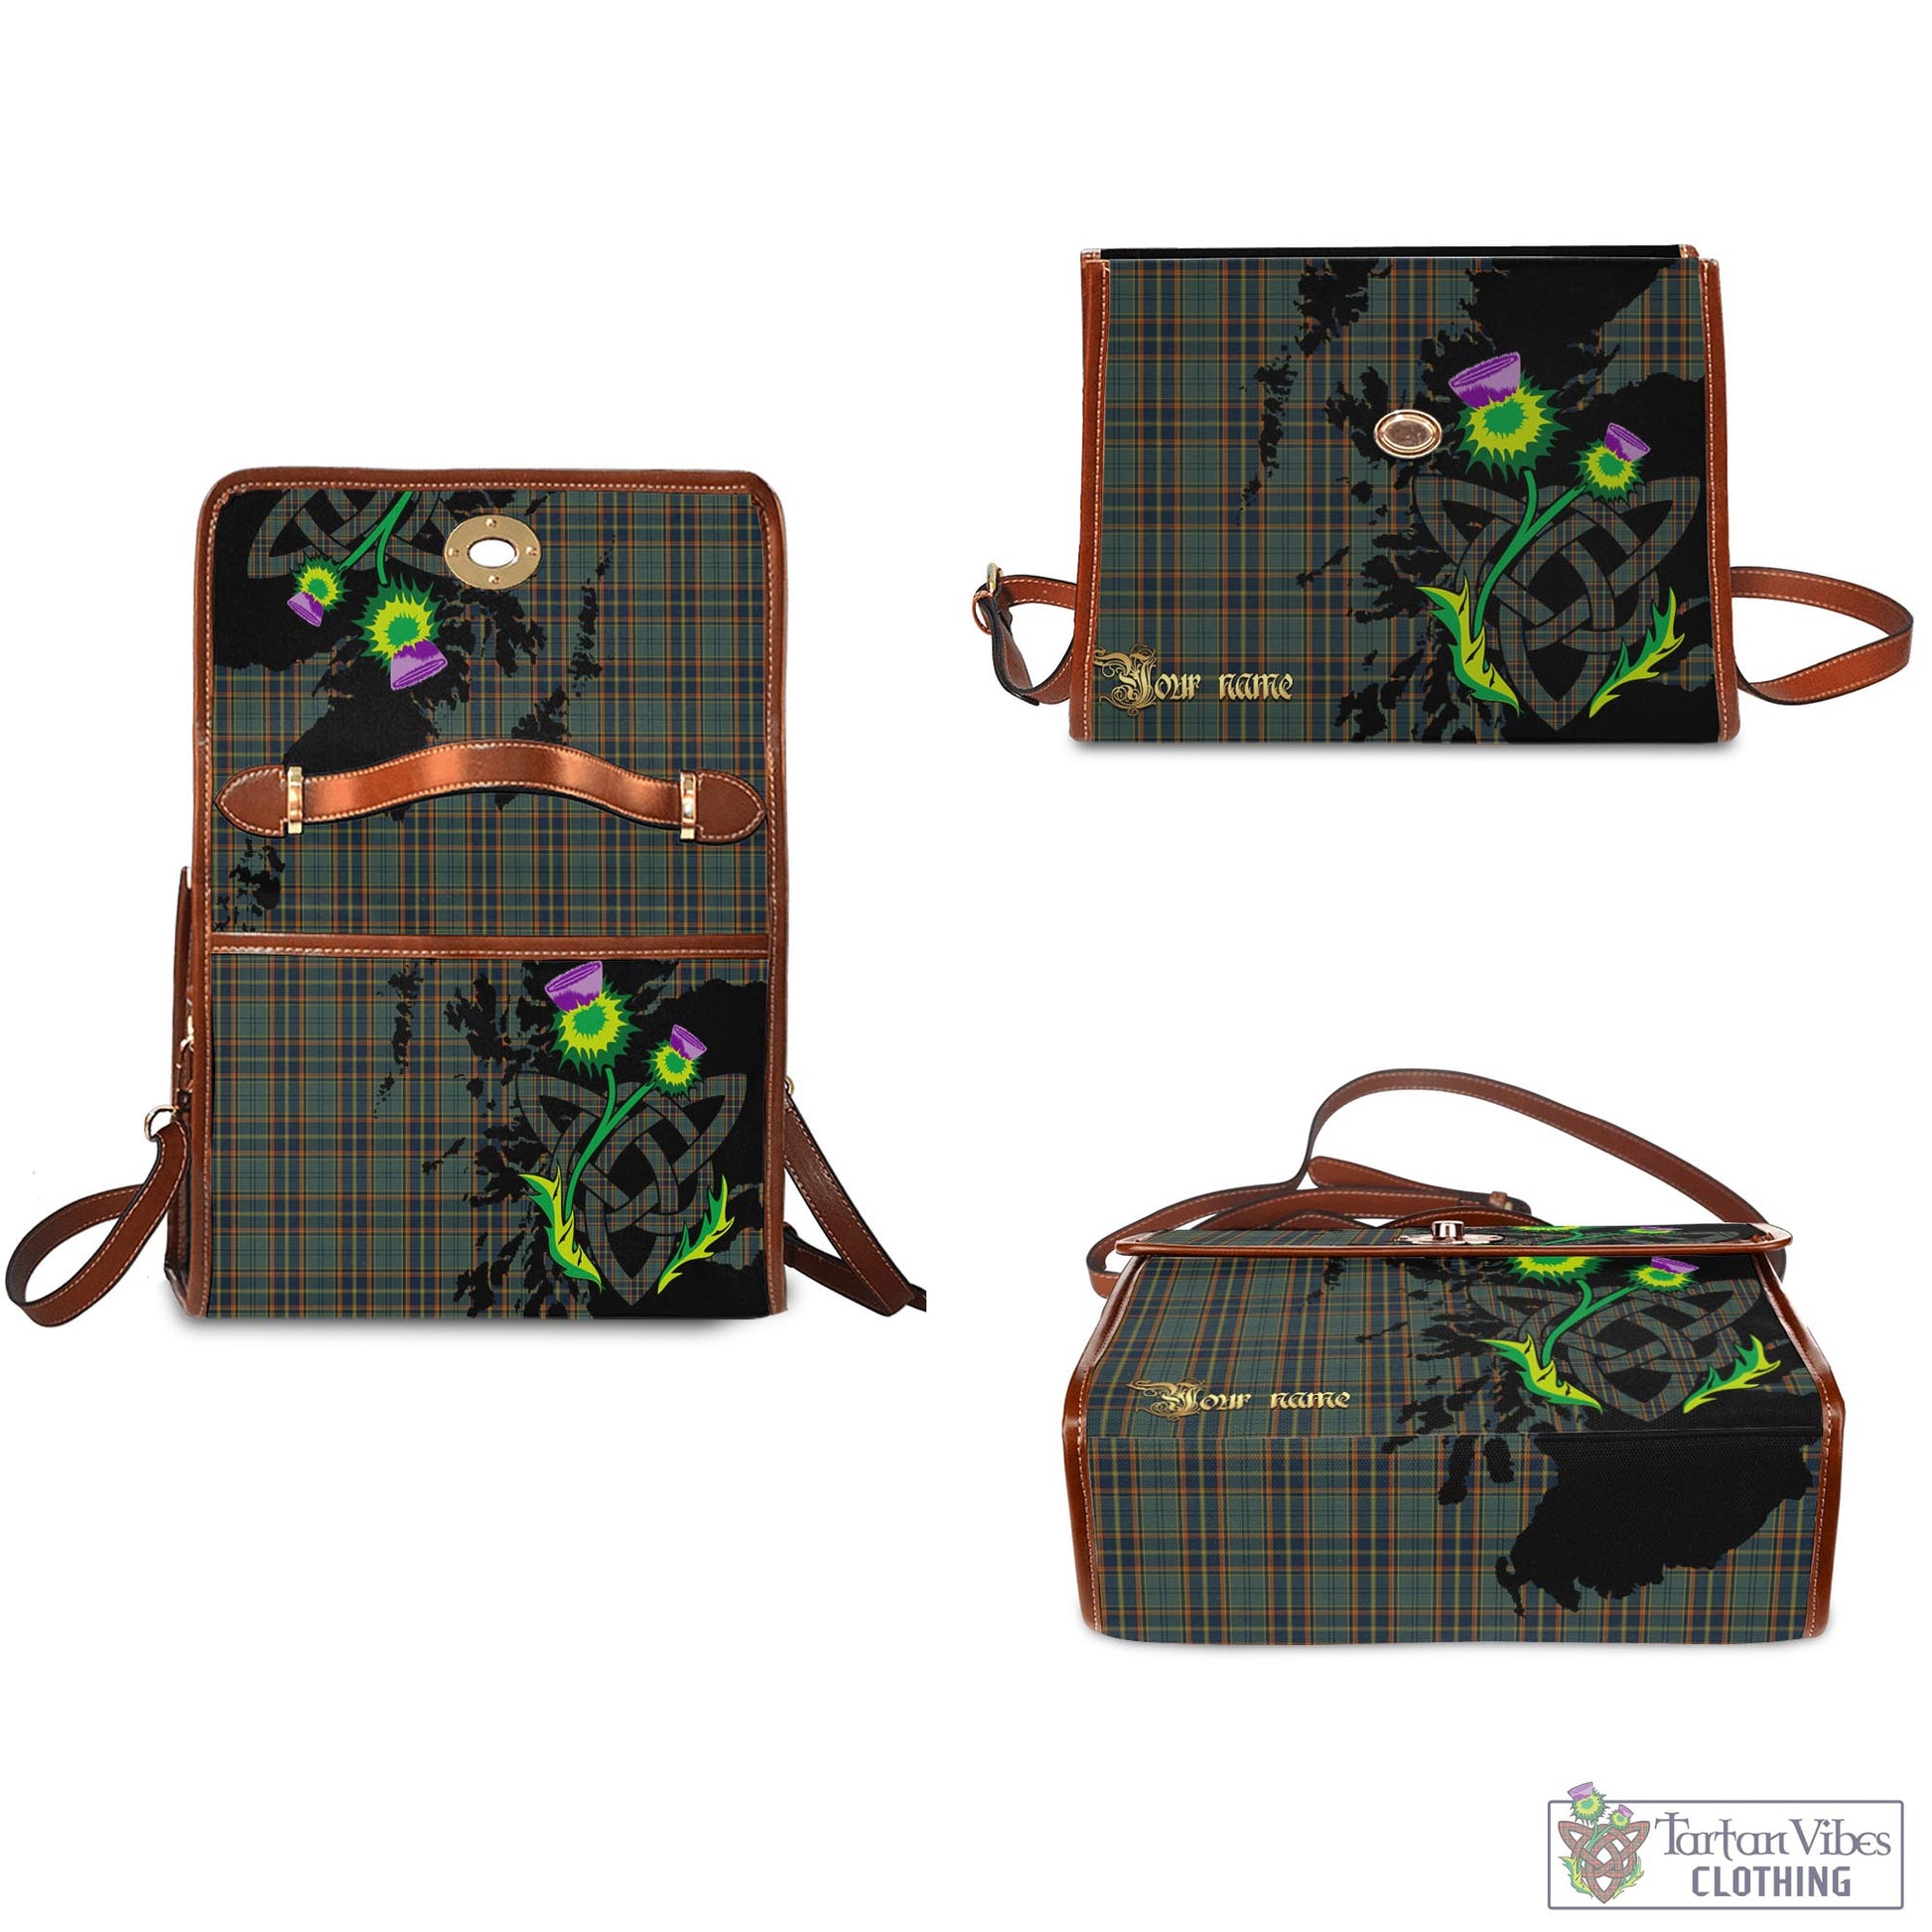 Tartan Vibes Clothing Antrim County Ireland Tartan Waterproof Canvas Bag with Scotland Map and Thistle Celtic Accents